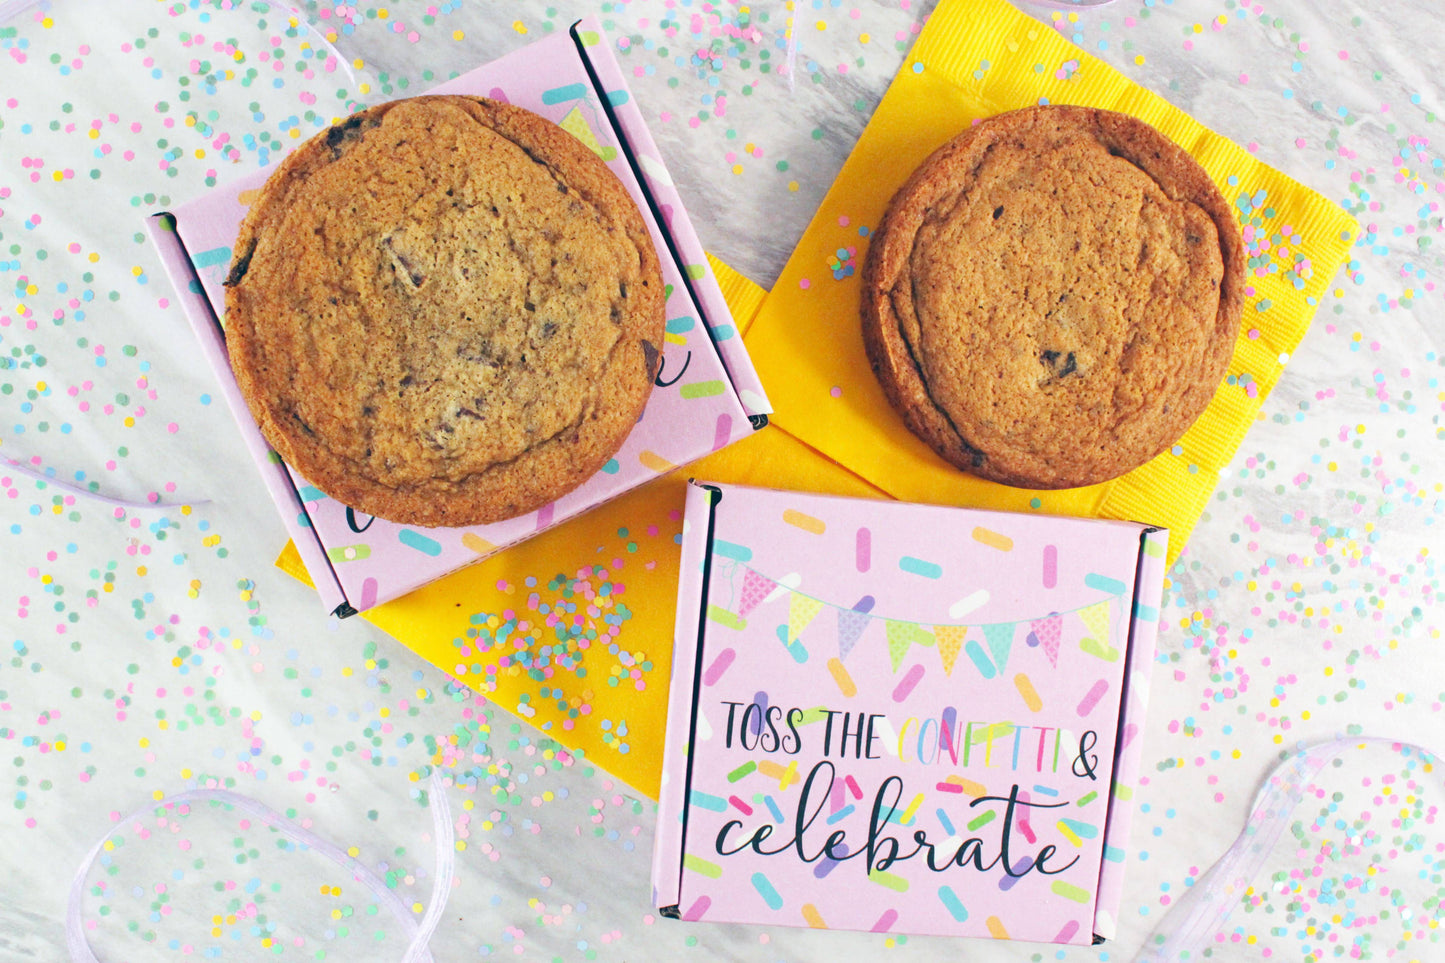 Celebrate Pastry Pouch by Sunflour Baking Company